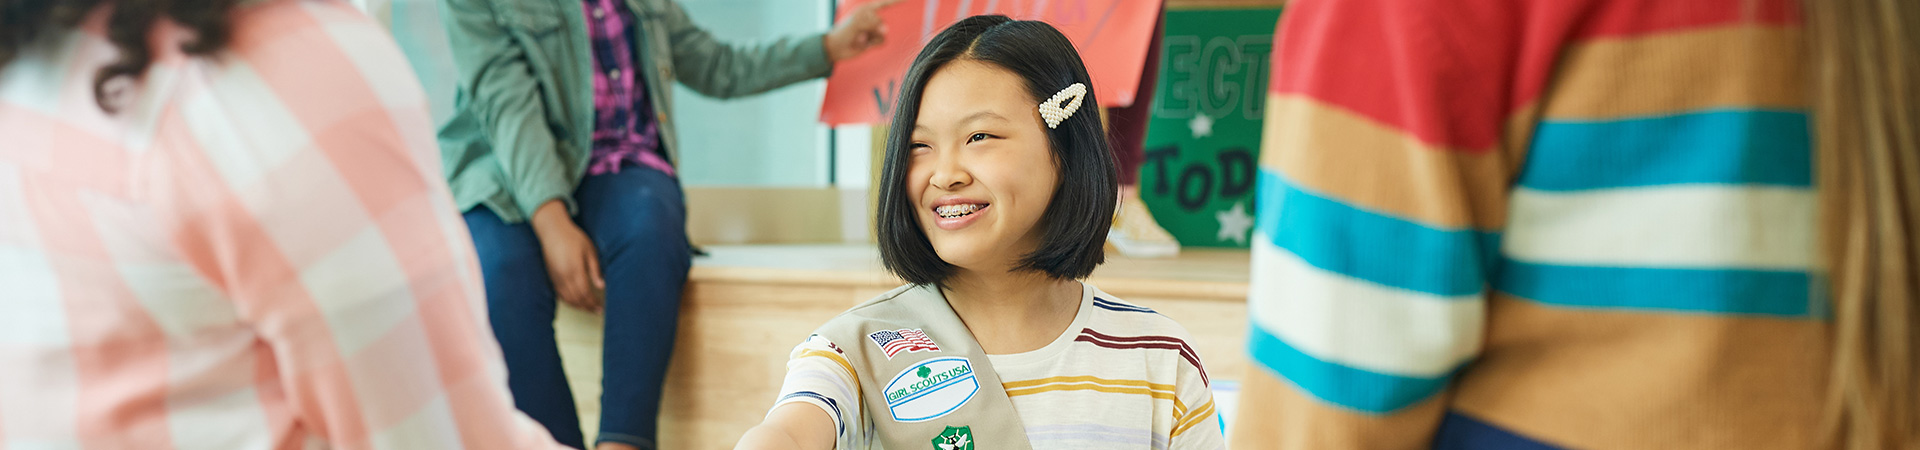  A Senior Girl Scout smiling at her two friends whose backs are to the camera 